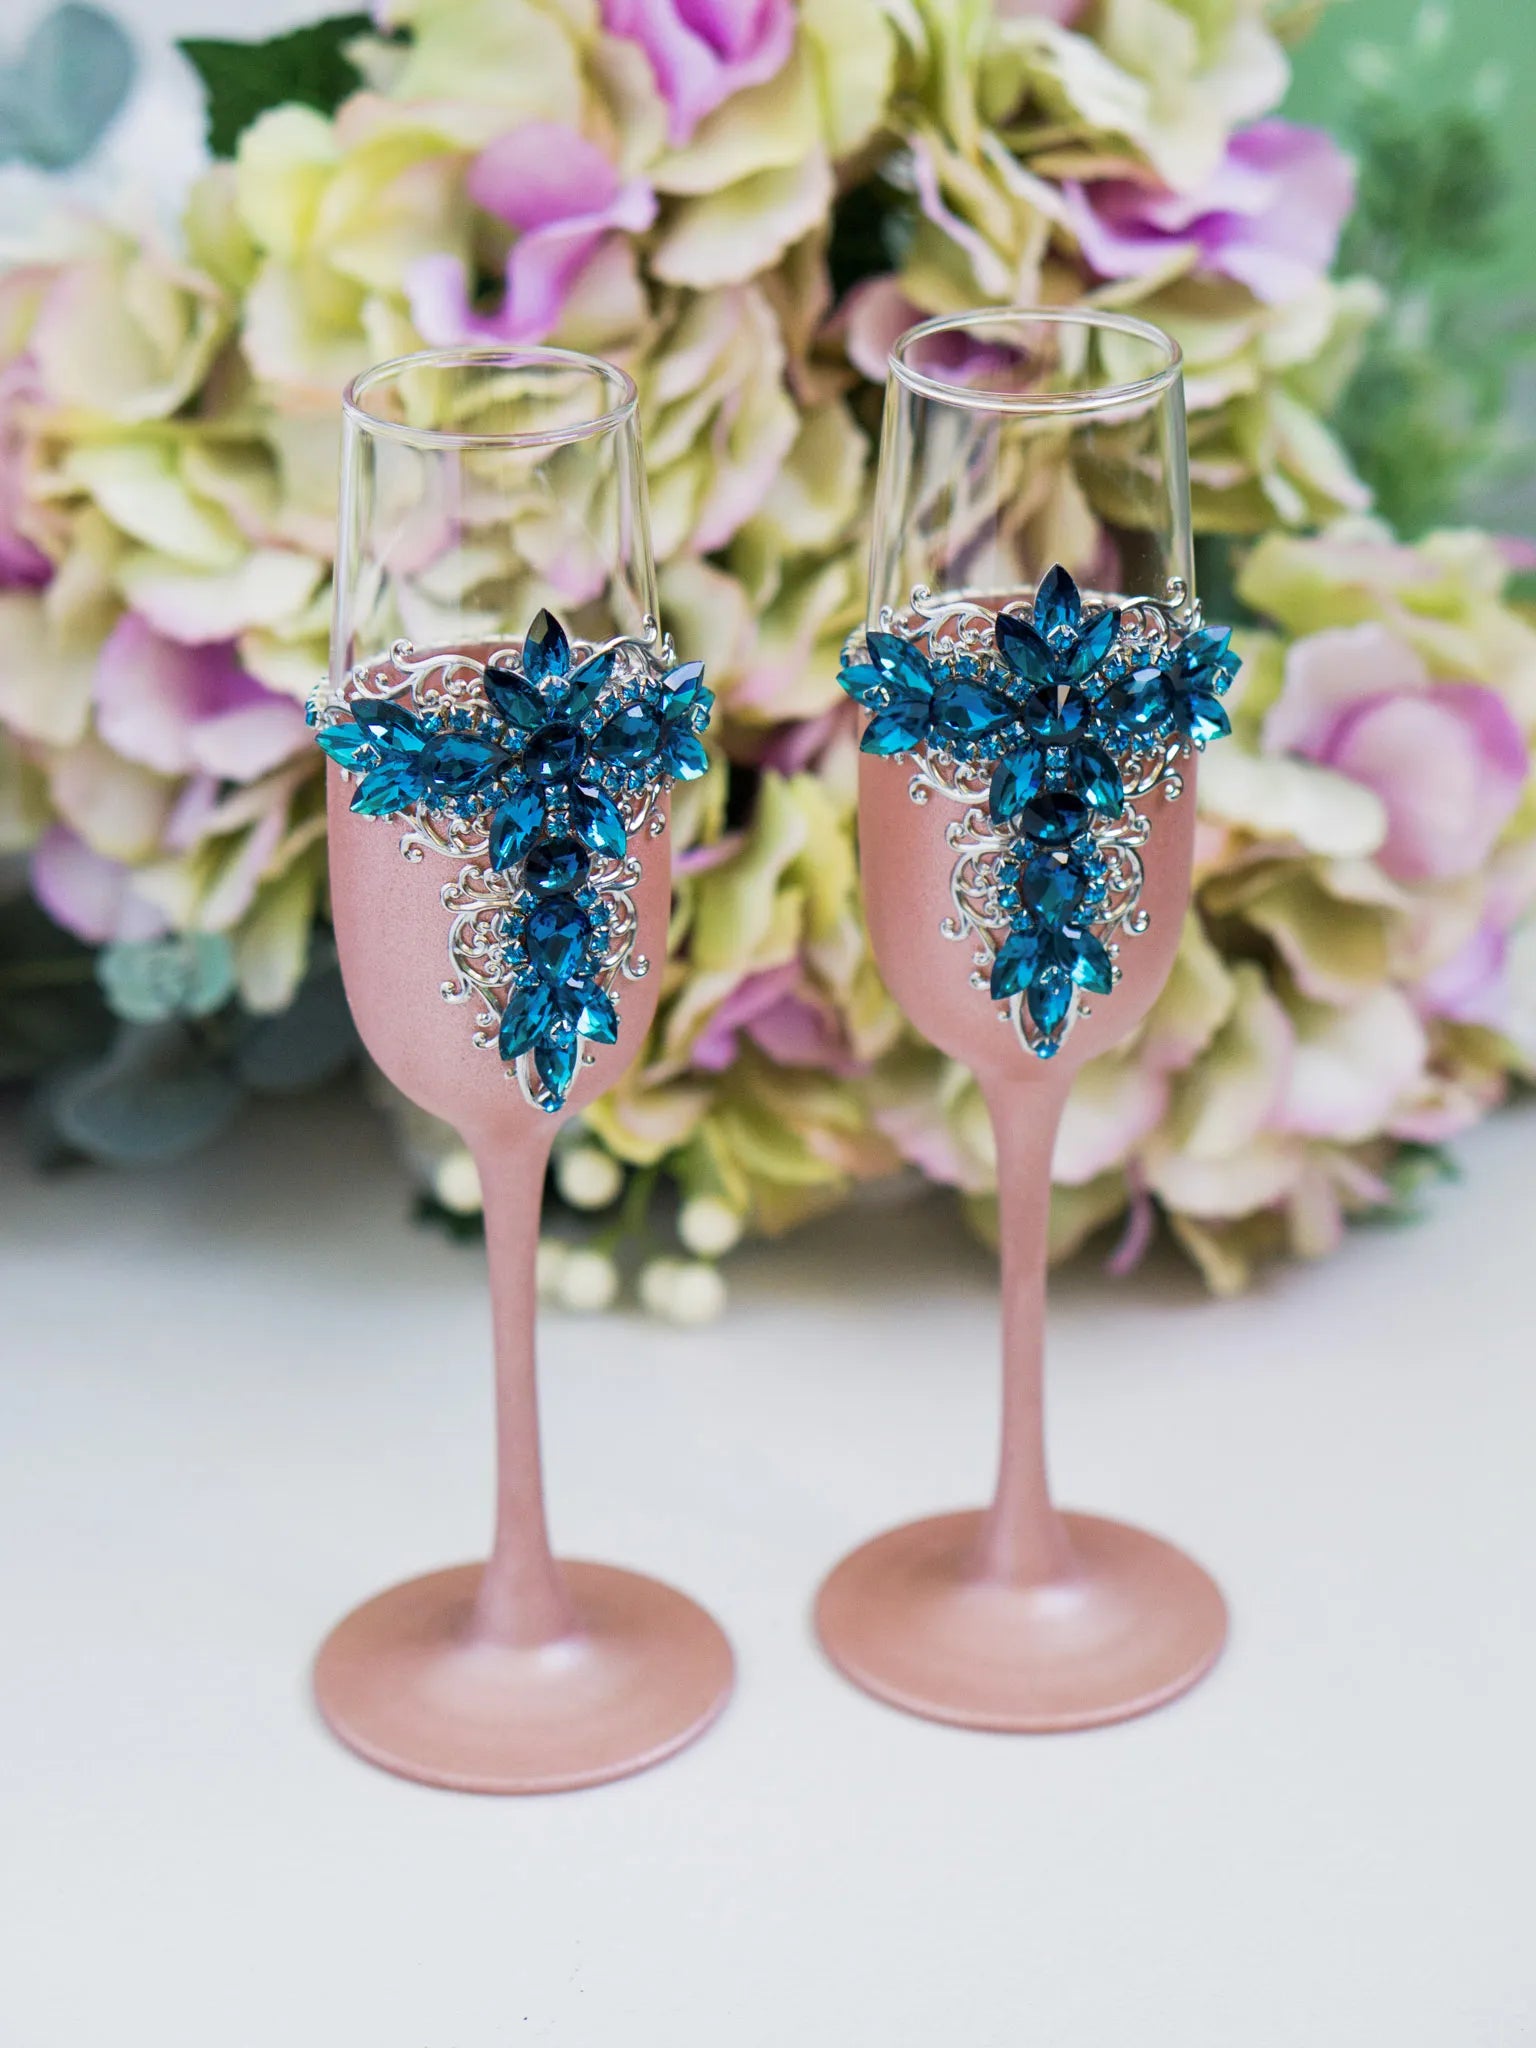 Personalized wedding champagne glasses in blue teal